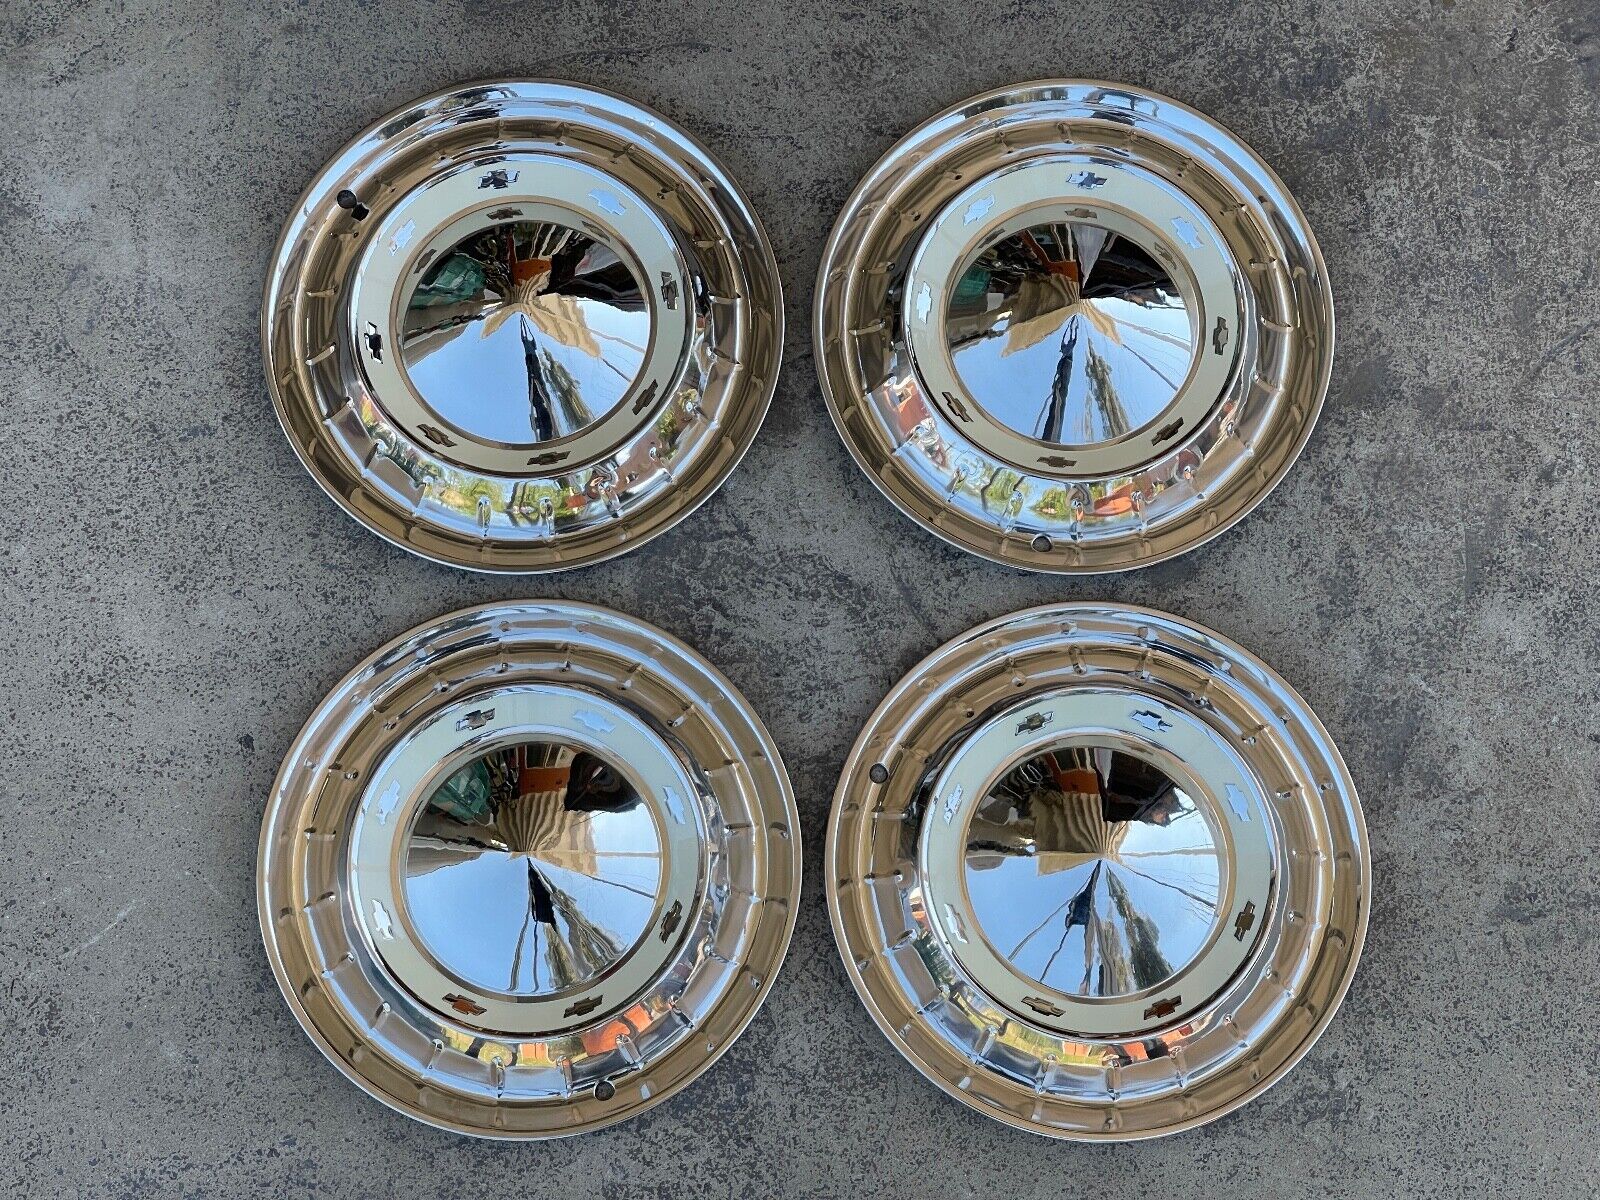 🔥 1955 CHEVROLET CHEVY BEL AIR BISCAYNE IMPALA HUBCAPS WHEEL COVERS 150 210 🔥